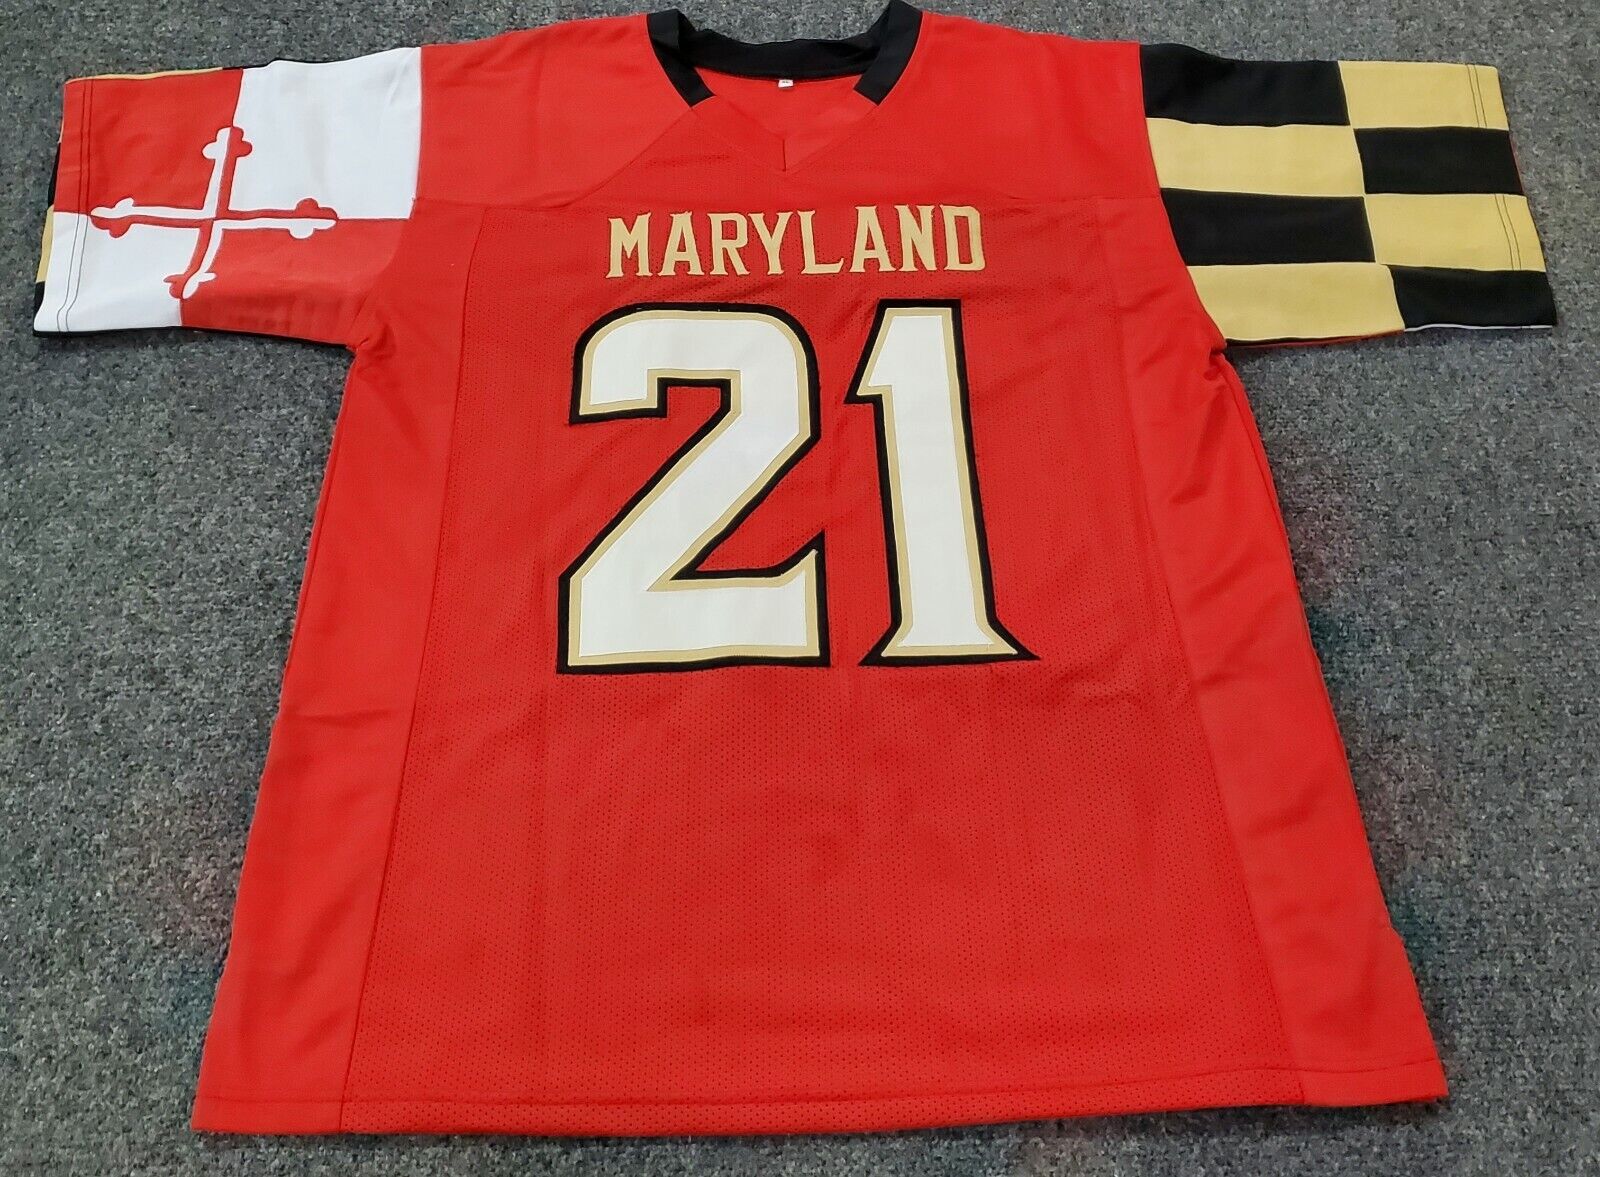 Terrapins jersey collection